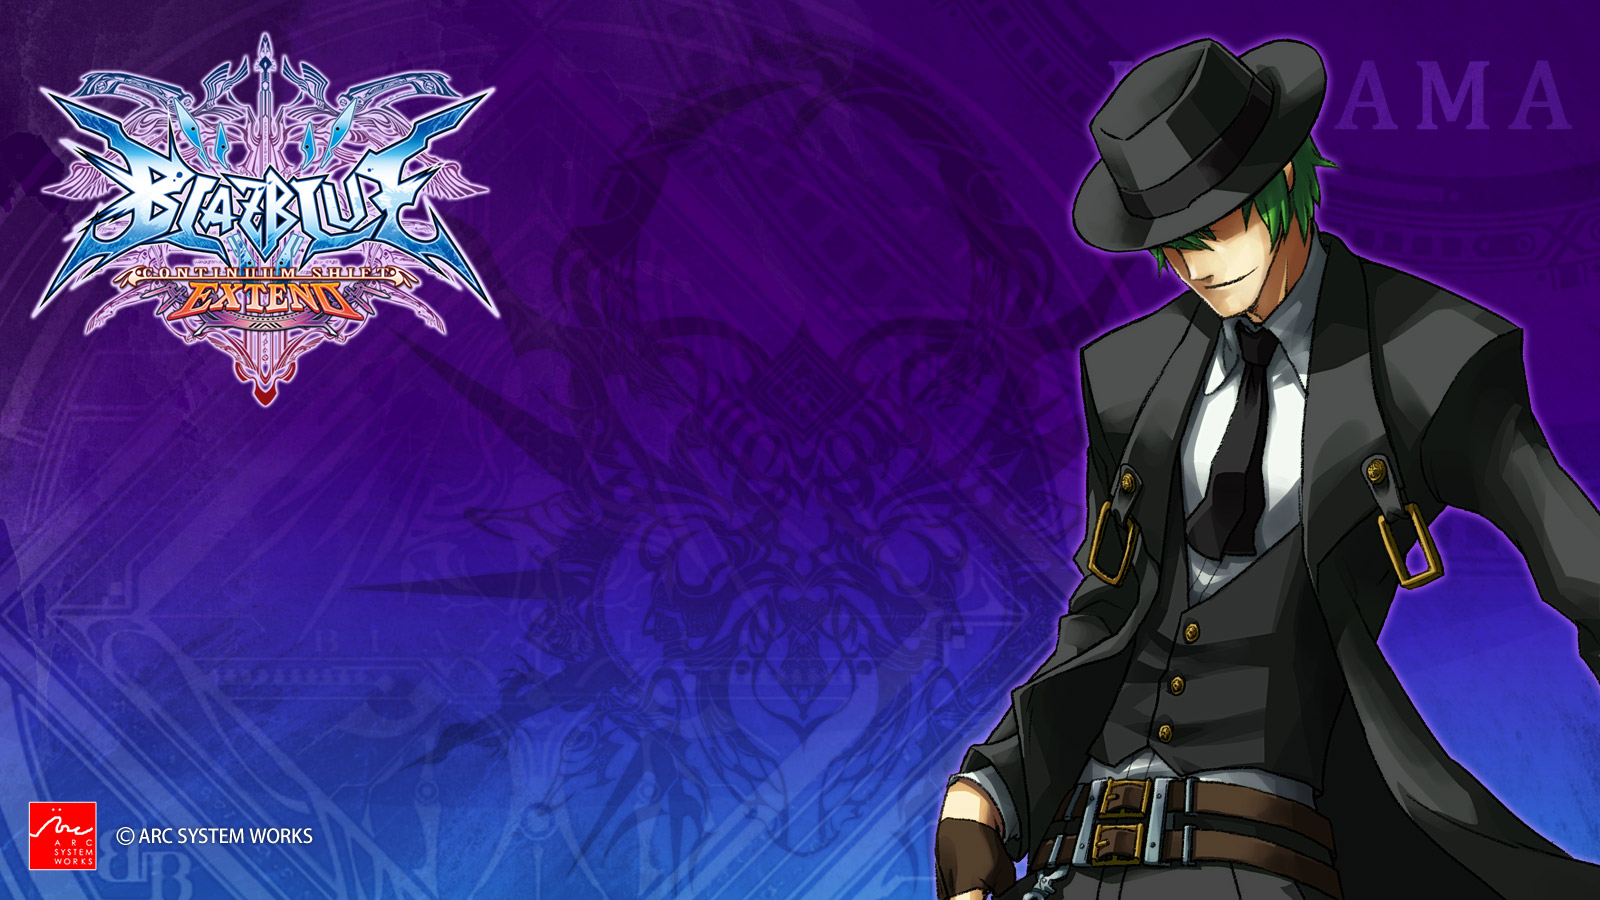 Blazblue Continuum Shift Extend Wallpaper 022 Hazama Wallpapers Ethereal Games